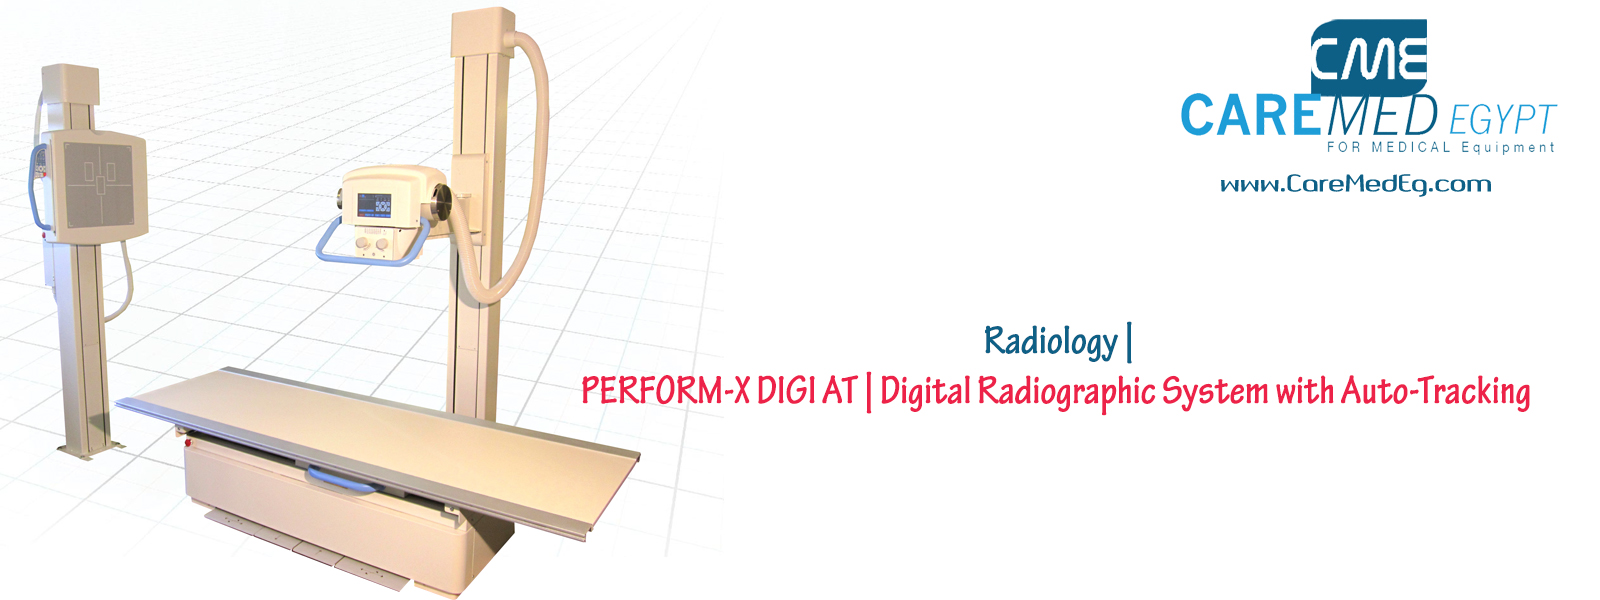 PERFORM-X DIGI AT | Digital Radiographic System with Auto-Tracking  